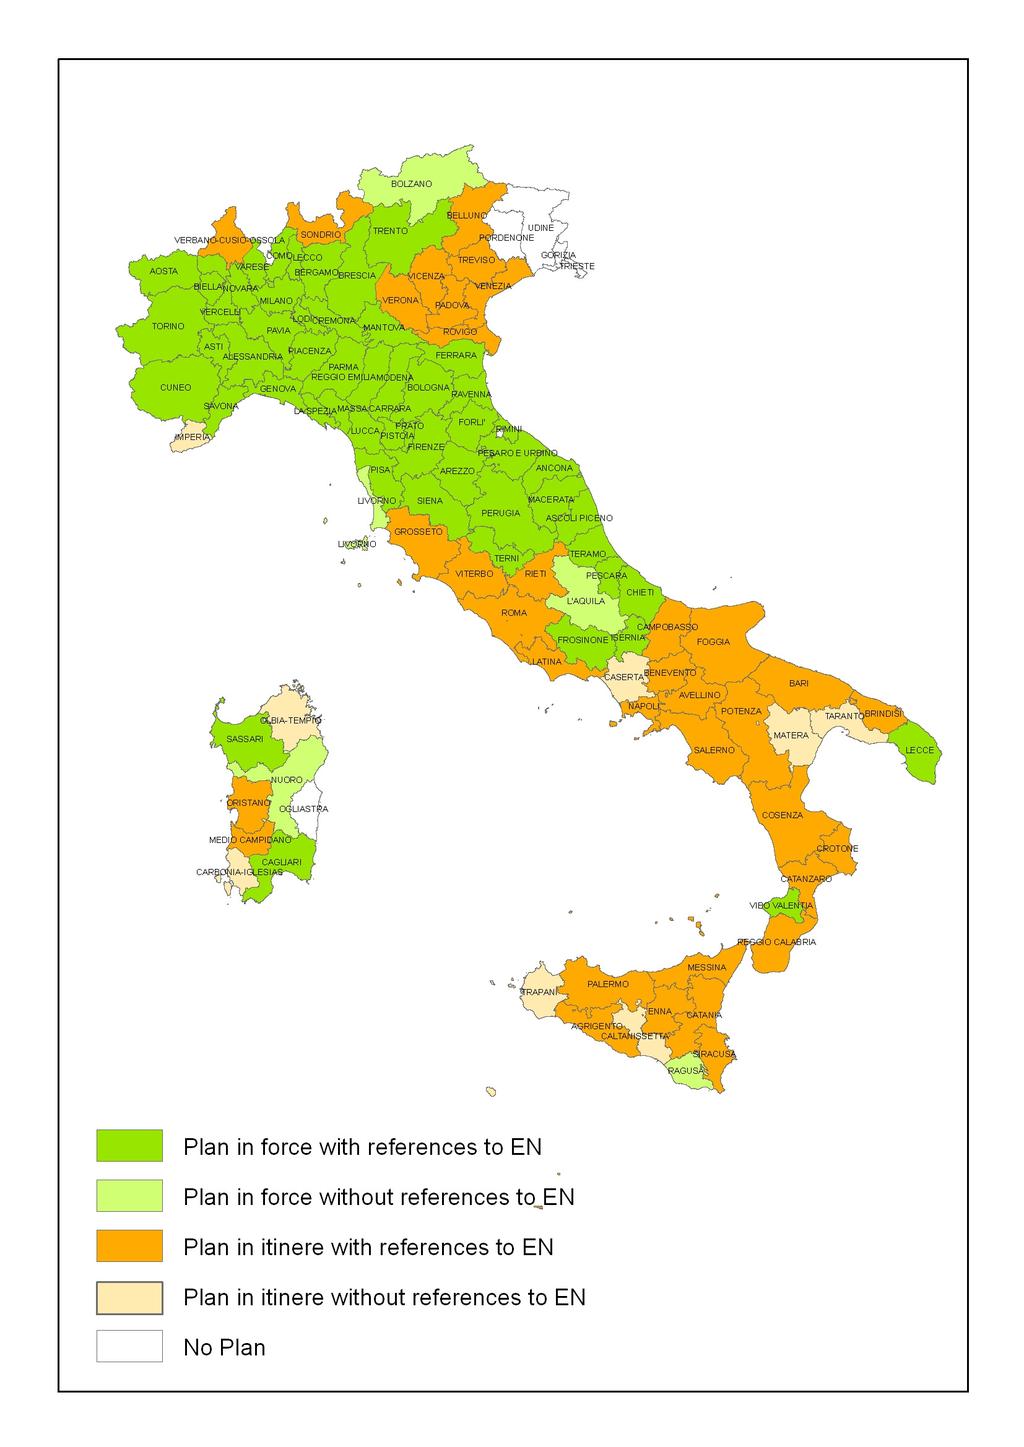 First Italian national census concerning integration of ecological network concept into territorial planning D Ambrogi S., Guccione M., Gori M., Nazzini L.